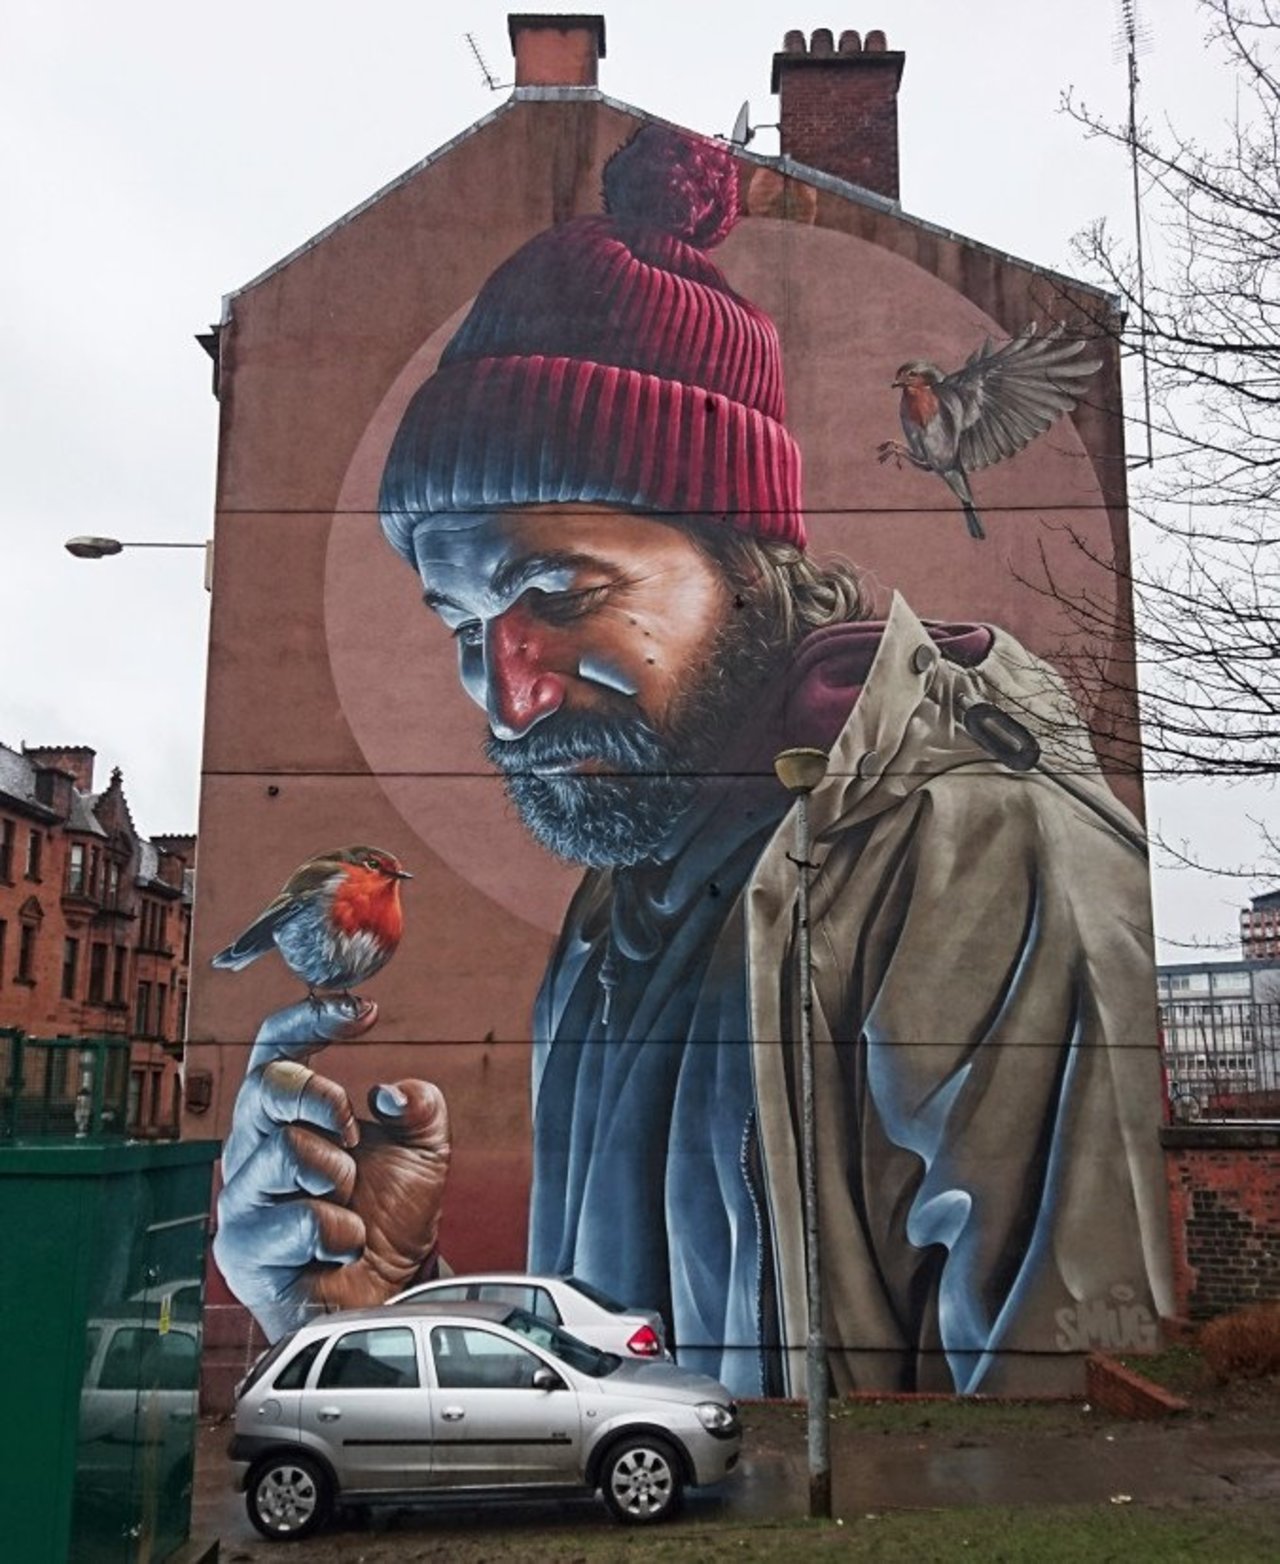 Glasgow has a number of cool #streetart pieces dotted around the city that have their own tales to tell. https://t.co/Okr771I439